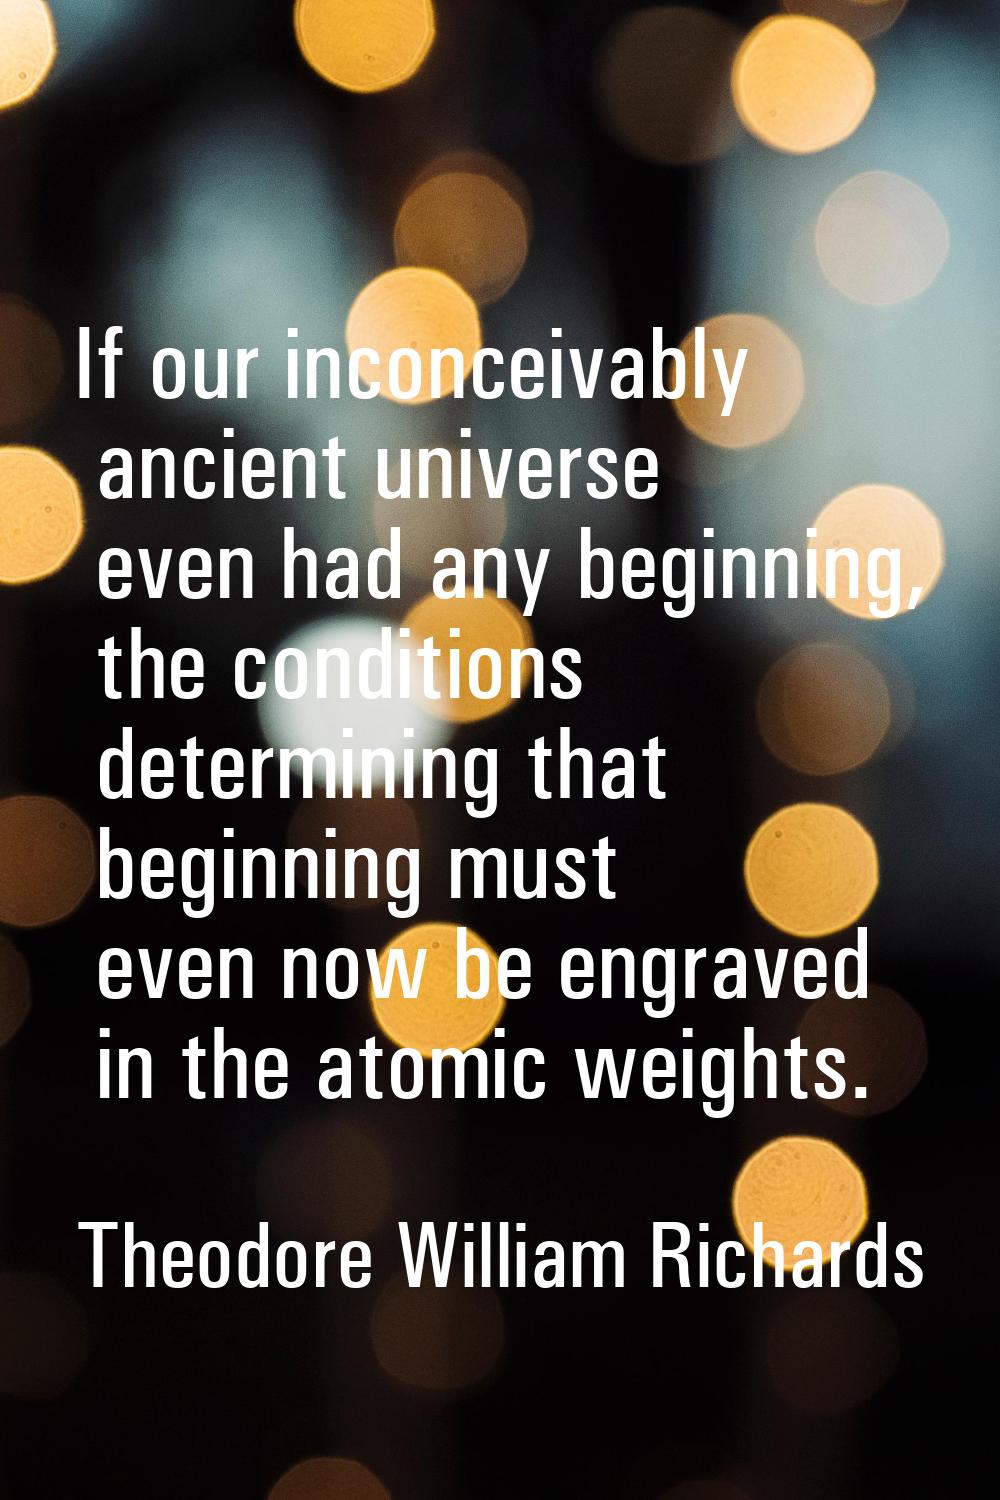 If our inconceivably ancient universe even had any beginning, the conditions determining that begin